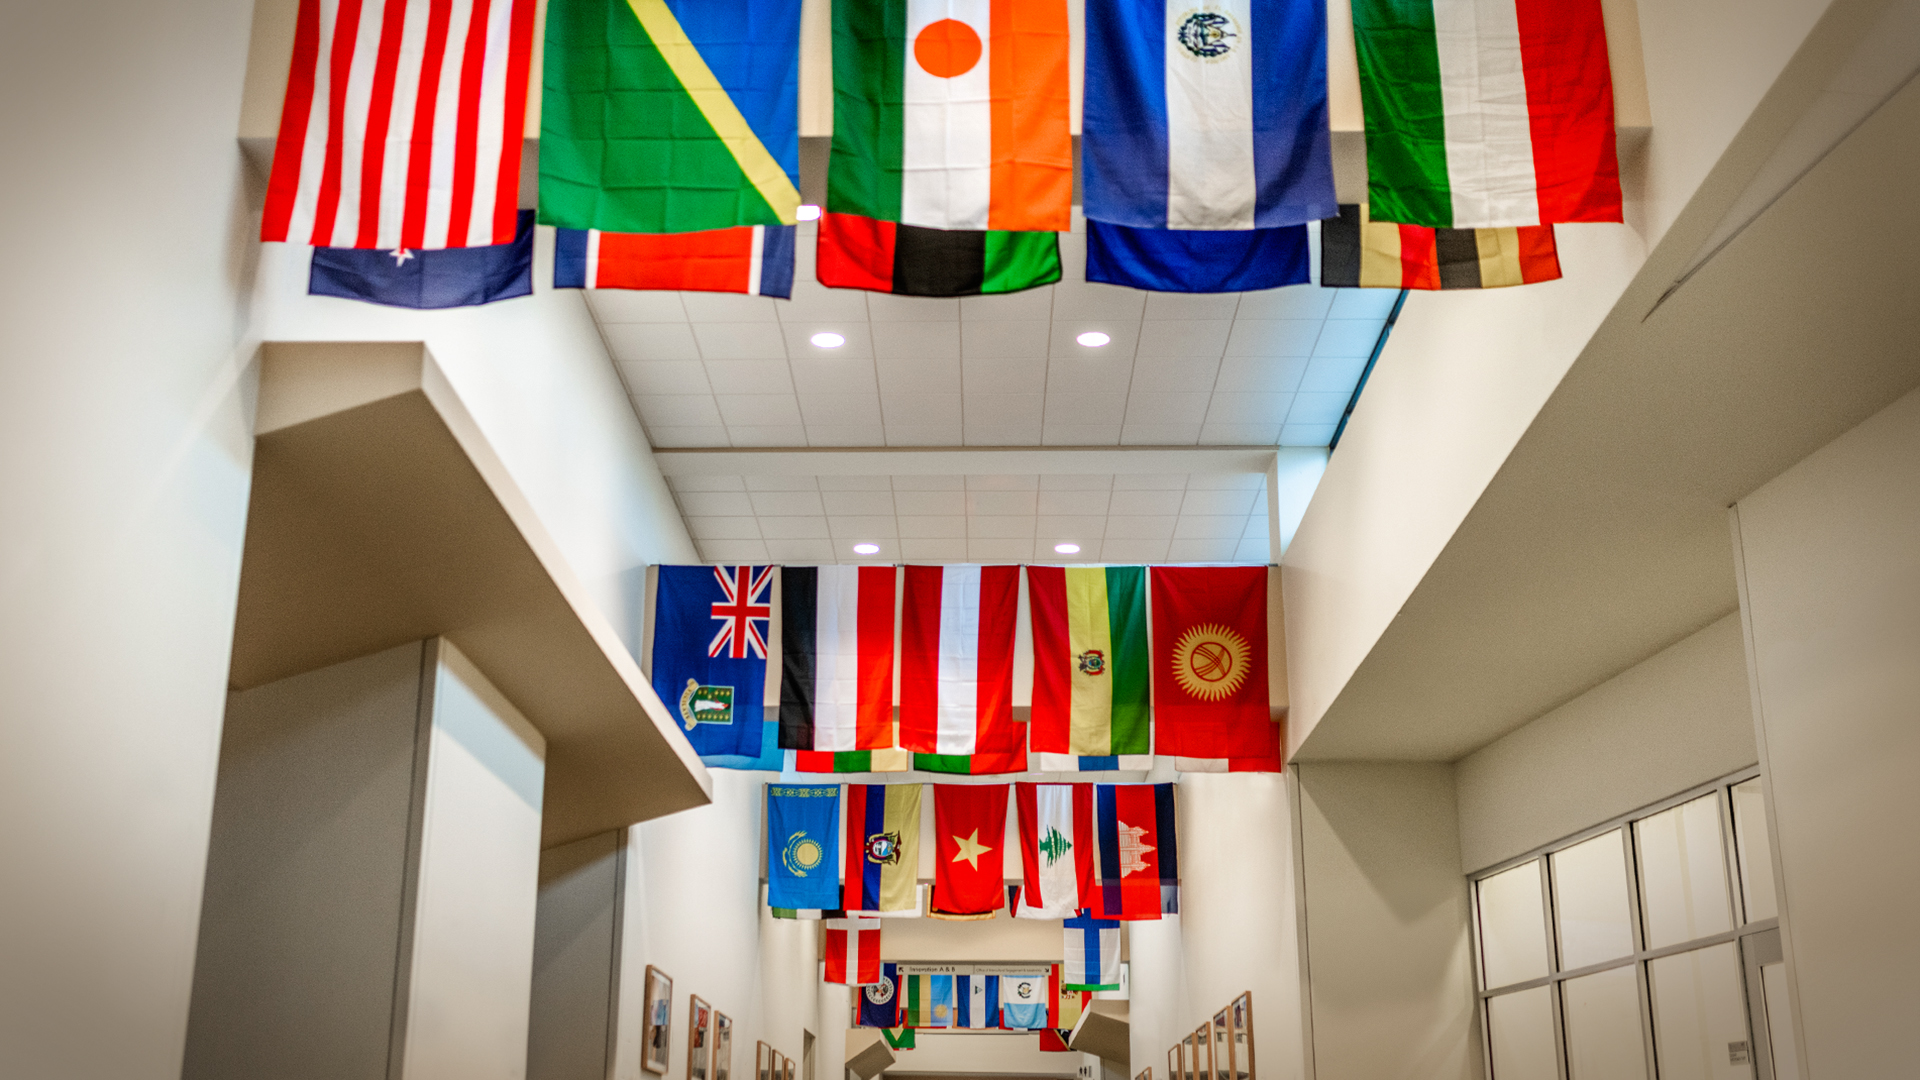 Inside of building with international flags on the ceiling.